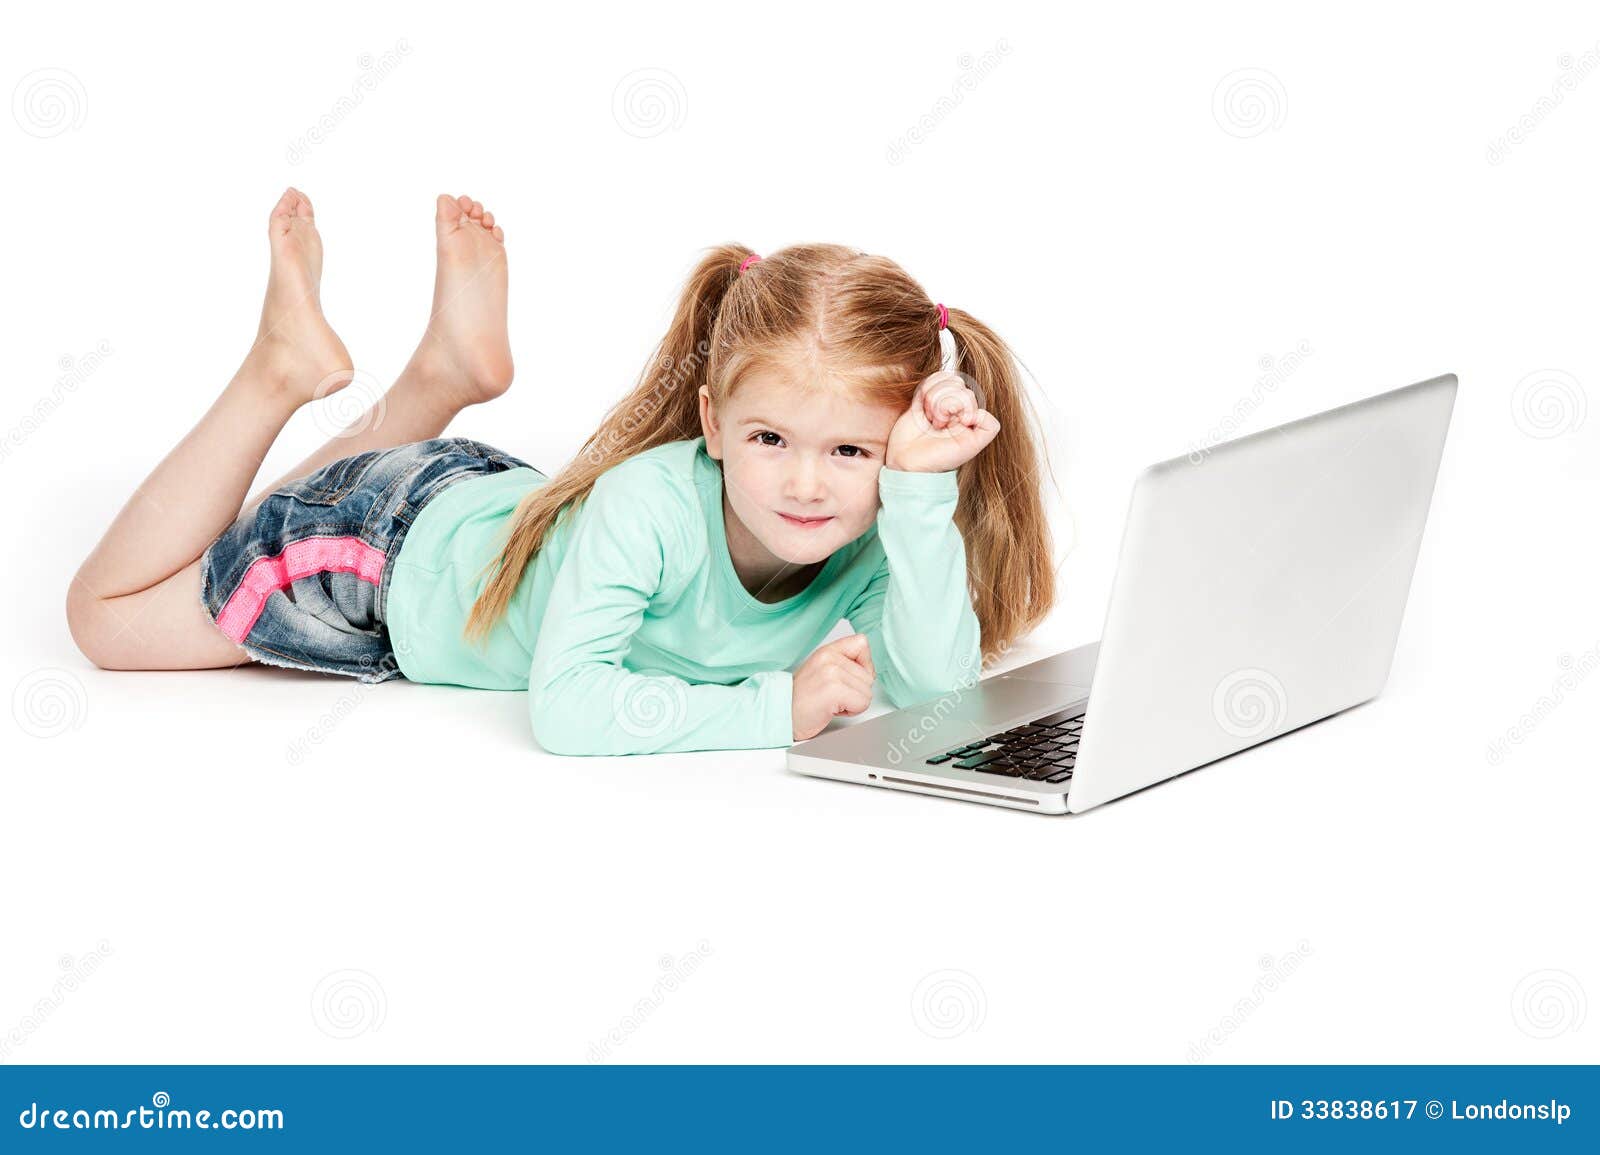 Funny Little Girl with Laptop Computer Stock Image - Image of girls,  grumpy: 33838617